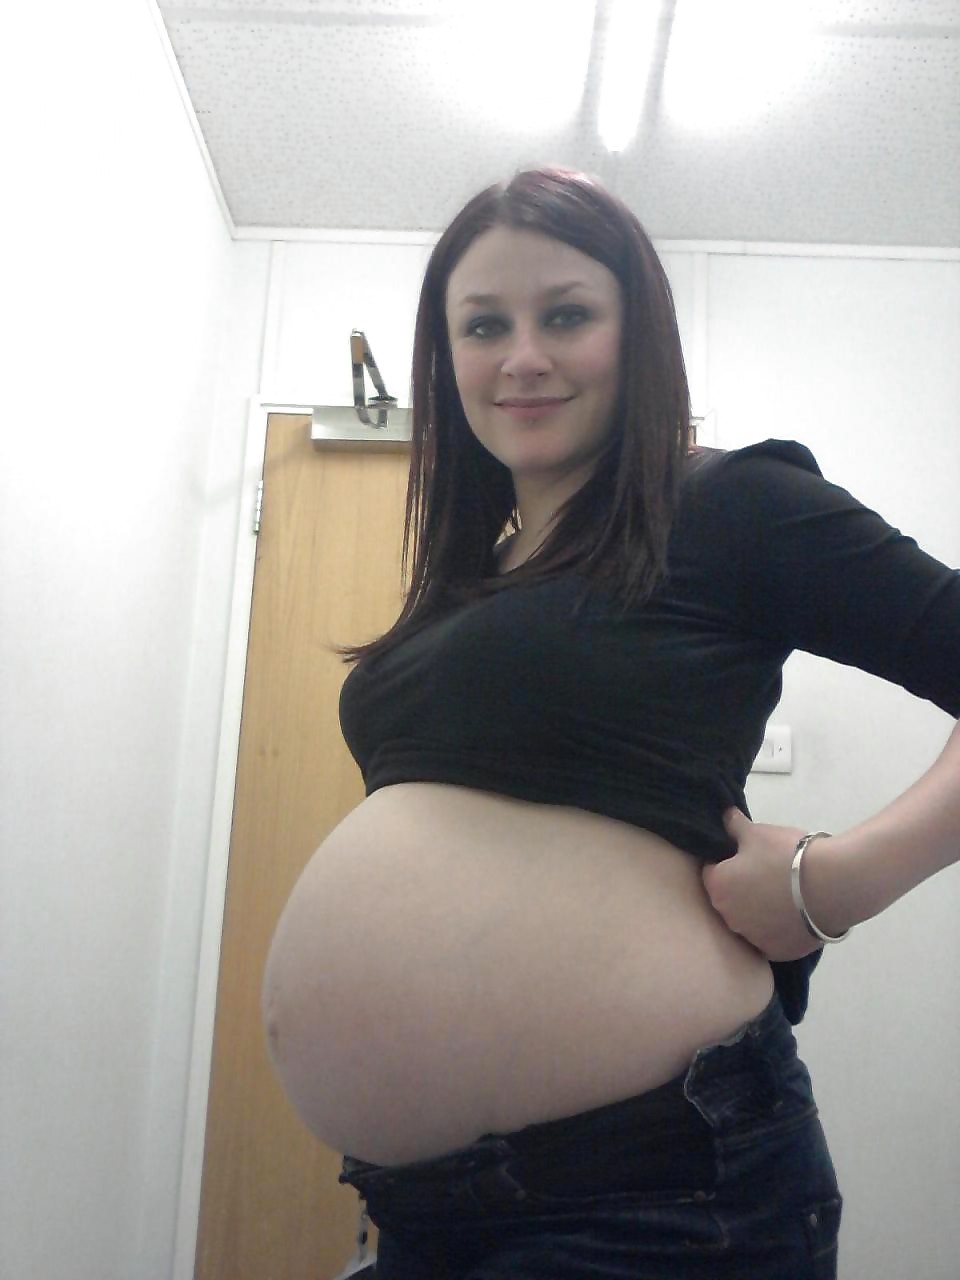 Sexy pregnant girls (showing belly) #21110328